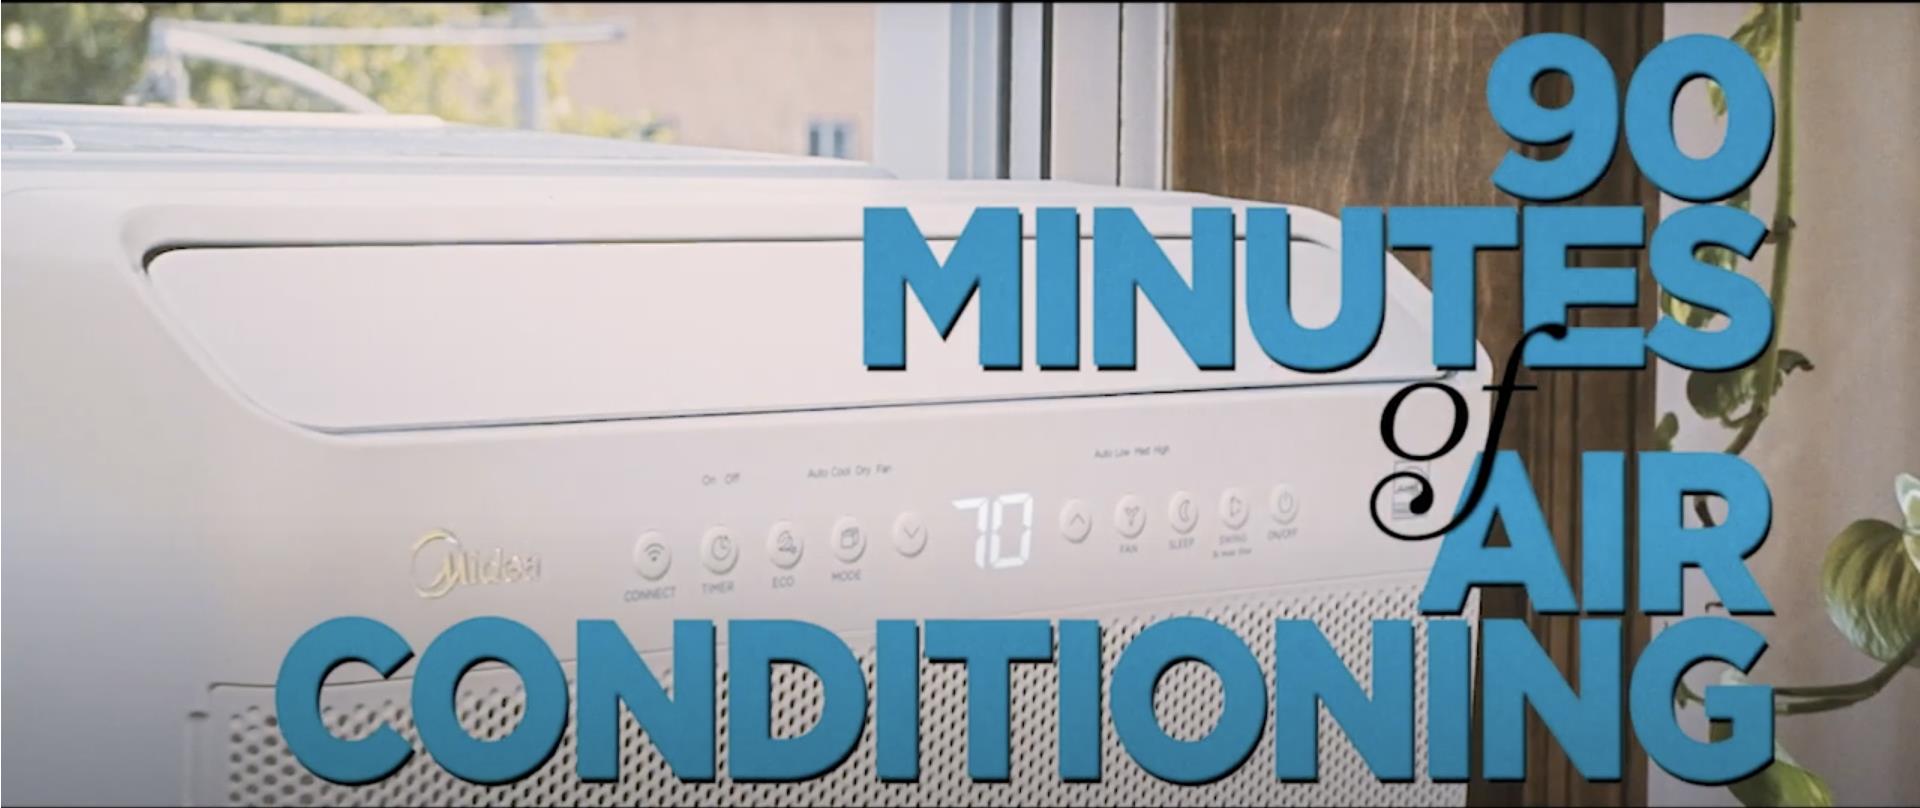 Midea: 90 Minutes of Air Conditioning